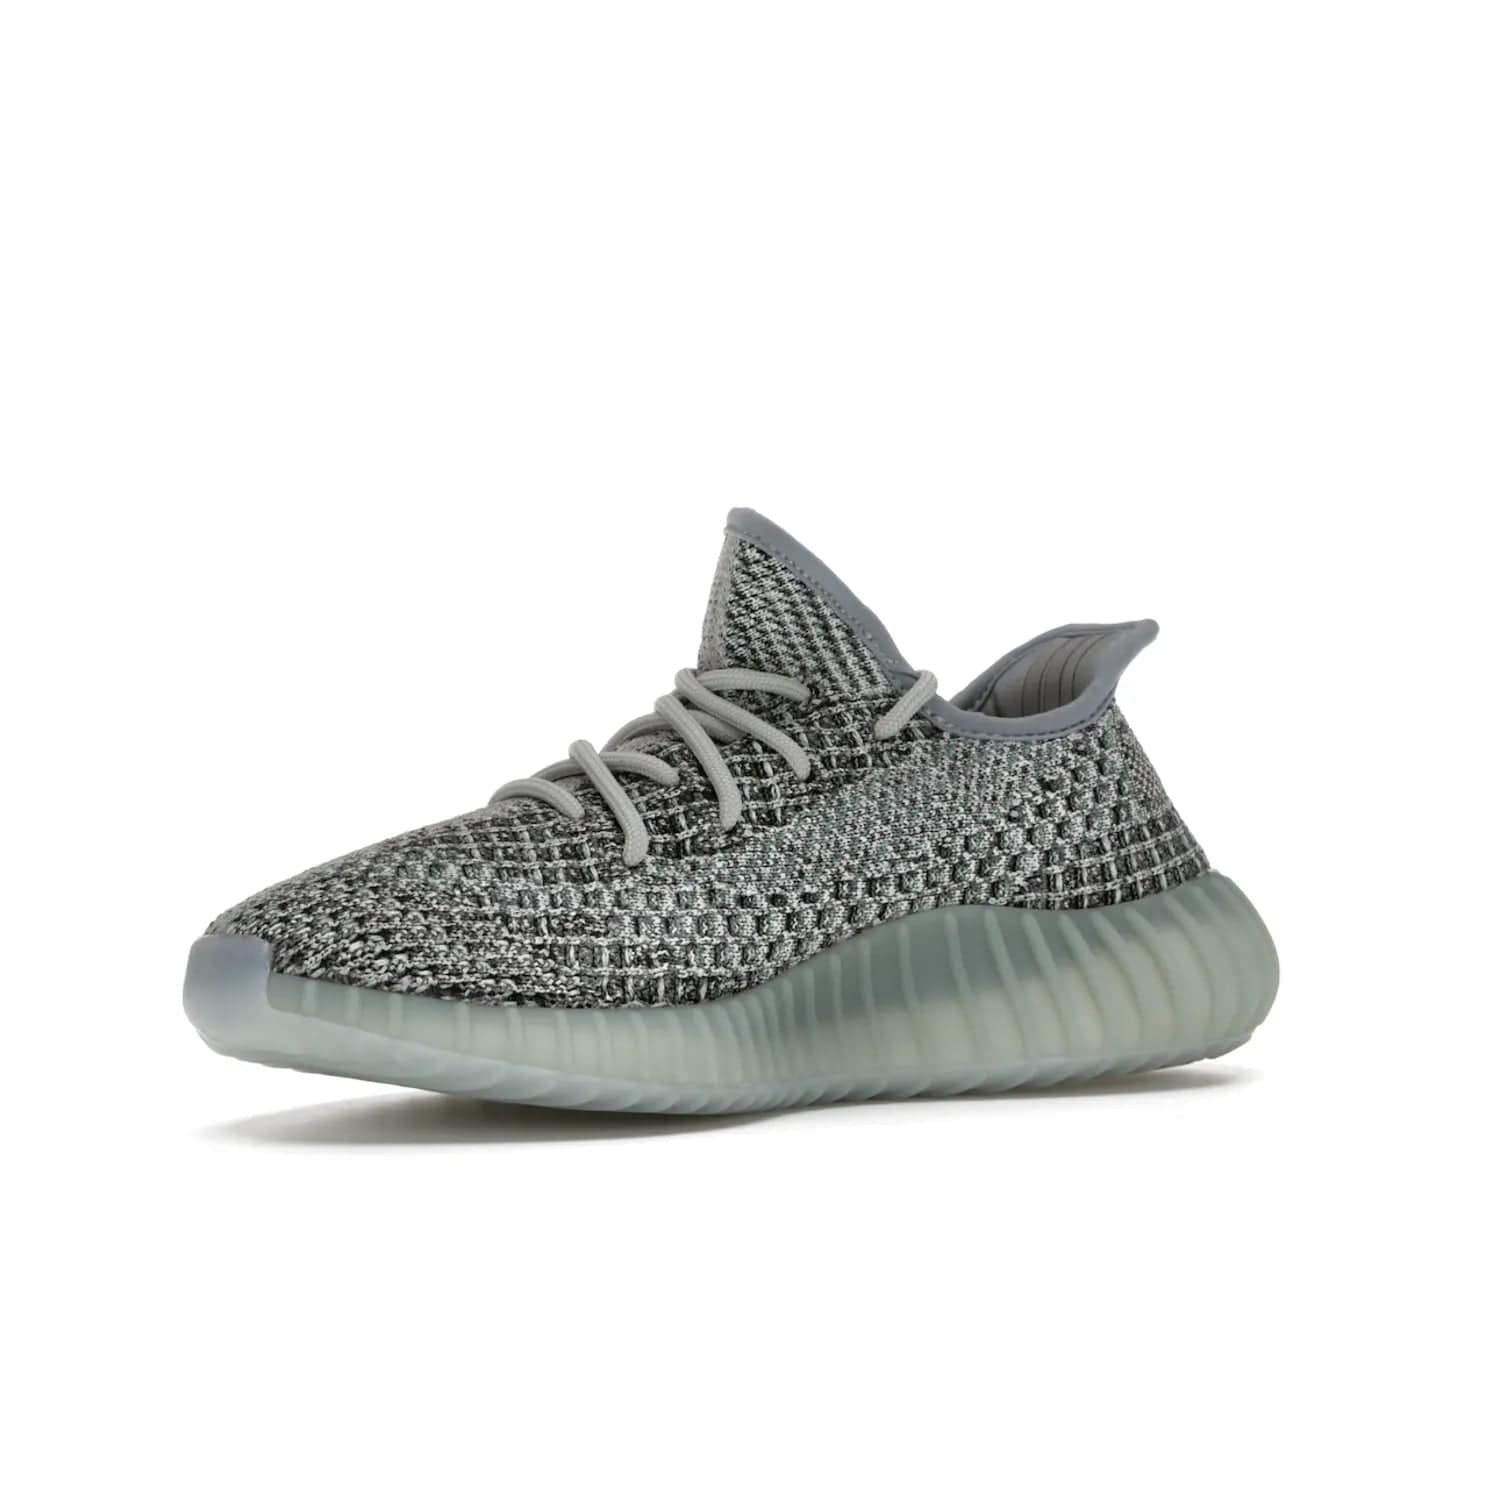 adidas Yeezy Boost 350 V2 Ash Blue - Image 16 - Only at www.BallersClubKickz.com - Must-have design made of engineered primeknit upper, comfortable sock-like upper and full-length Boost midsole, and semi-translucent rubber cage for added durability and style. The adidas Yeezy Boost 350 V2 Ash Blue blends timeless colors and comfort.